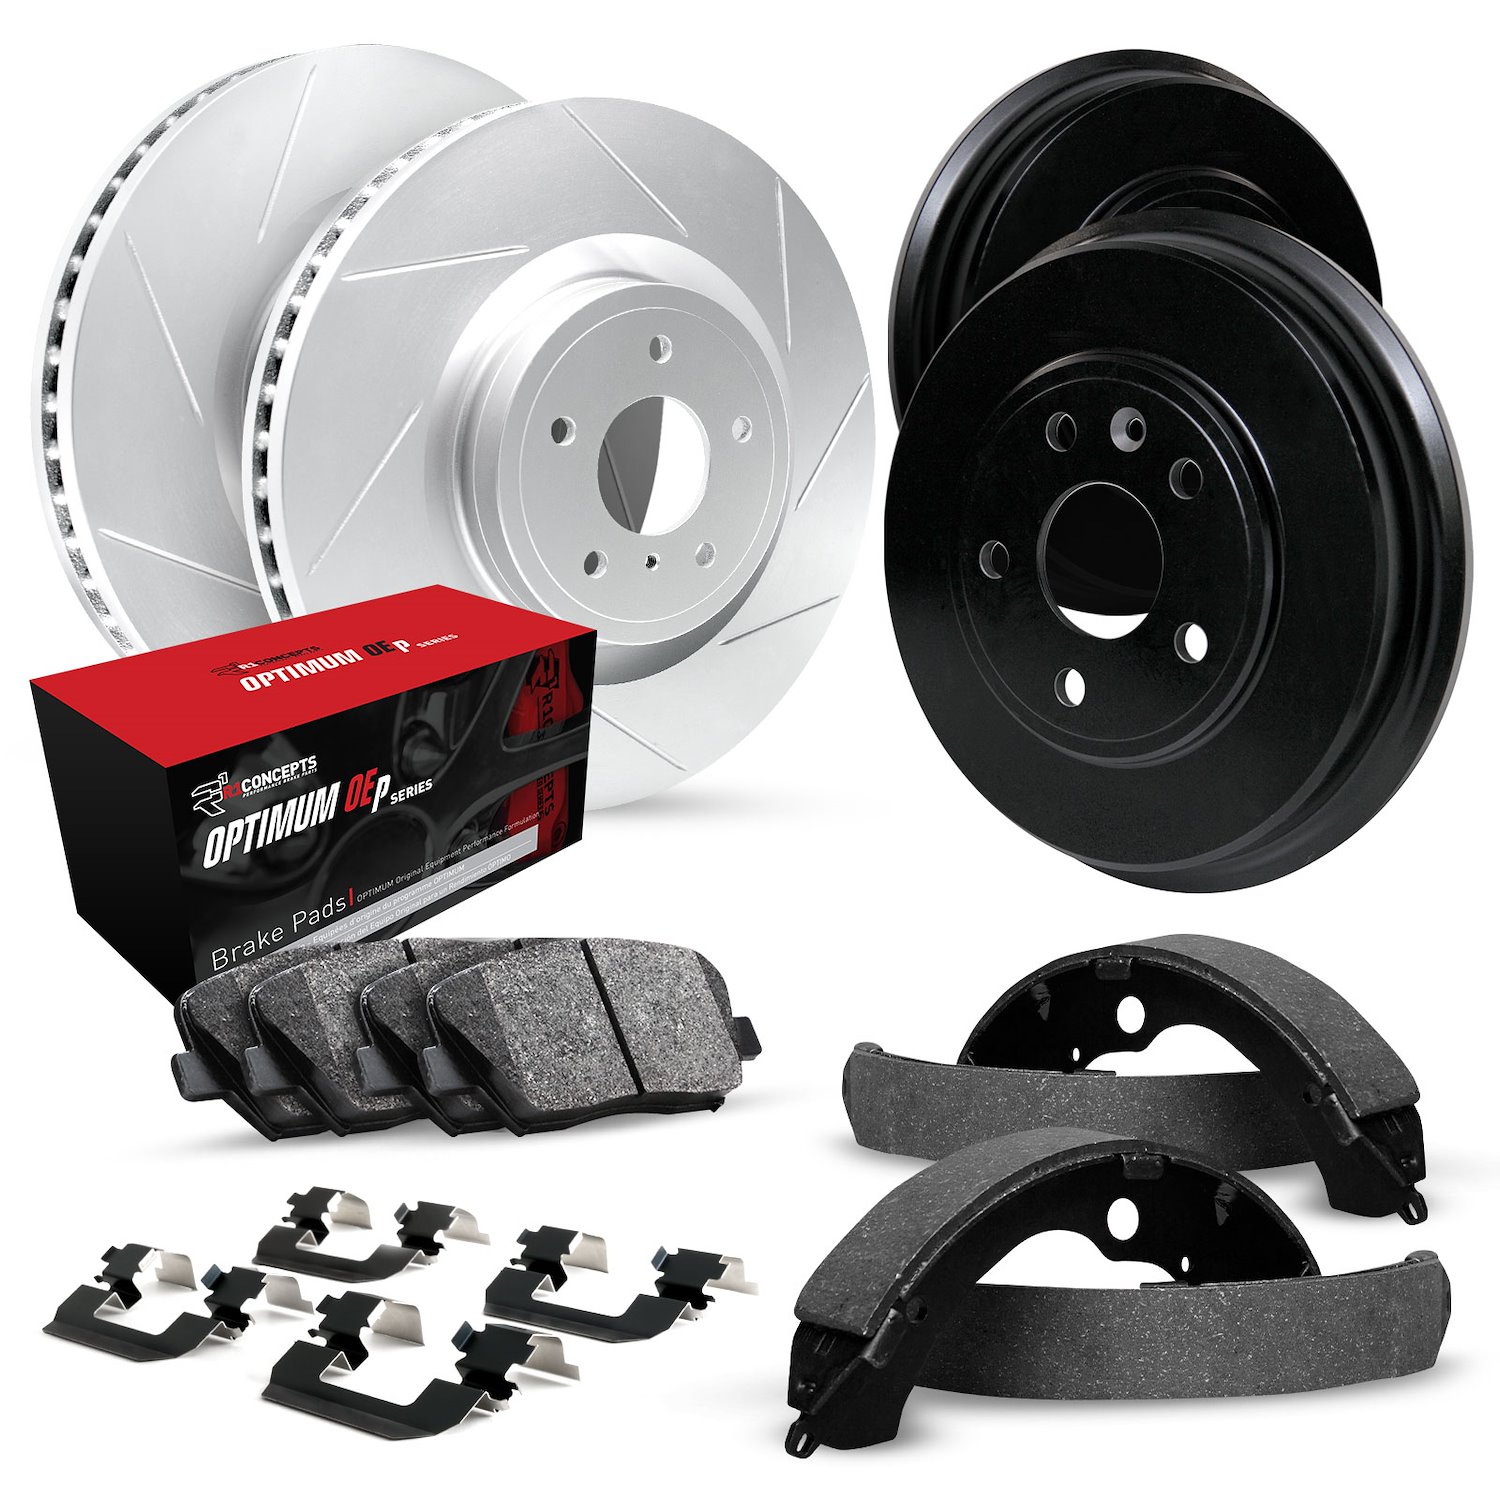 GEO-Carbon Slotted Brake Rotor & Drum Set w/Optimum OE Pads, Shoes, & Hardware, 1975-1978 GM, Position: Front & Rear